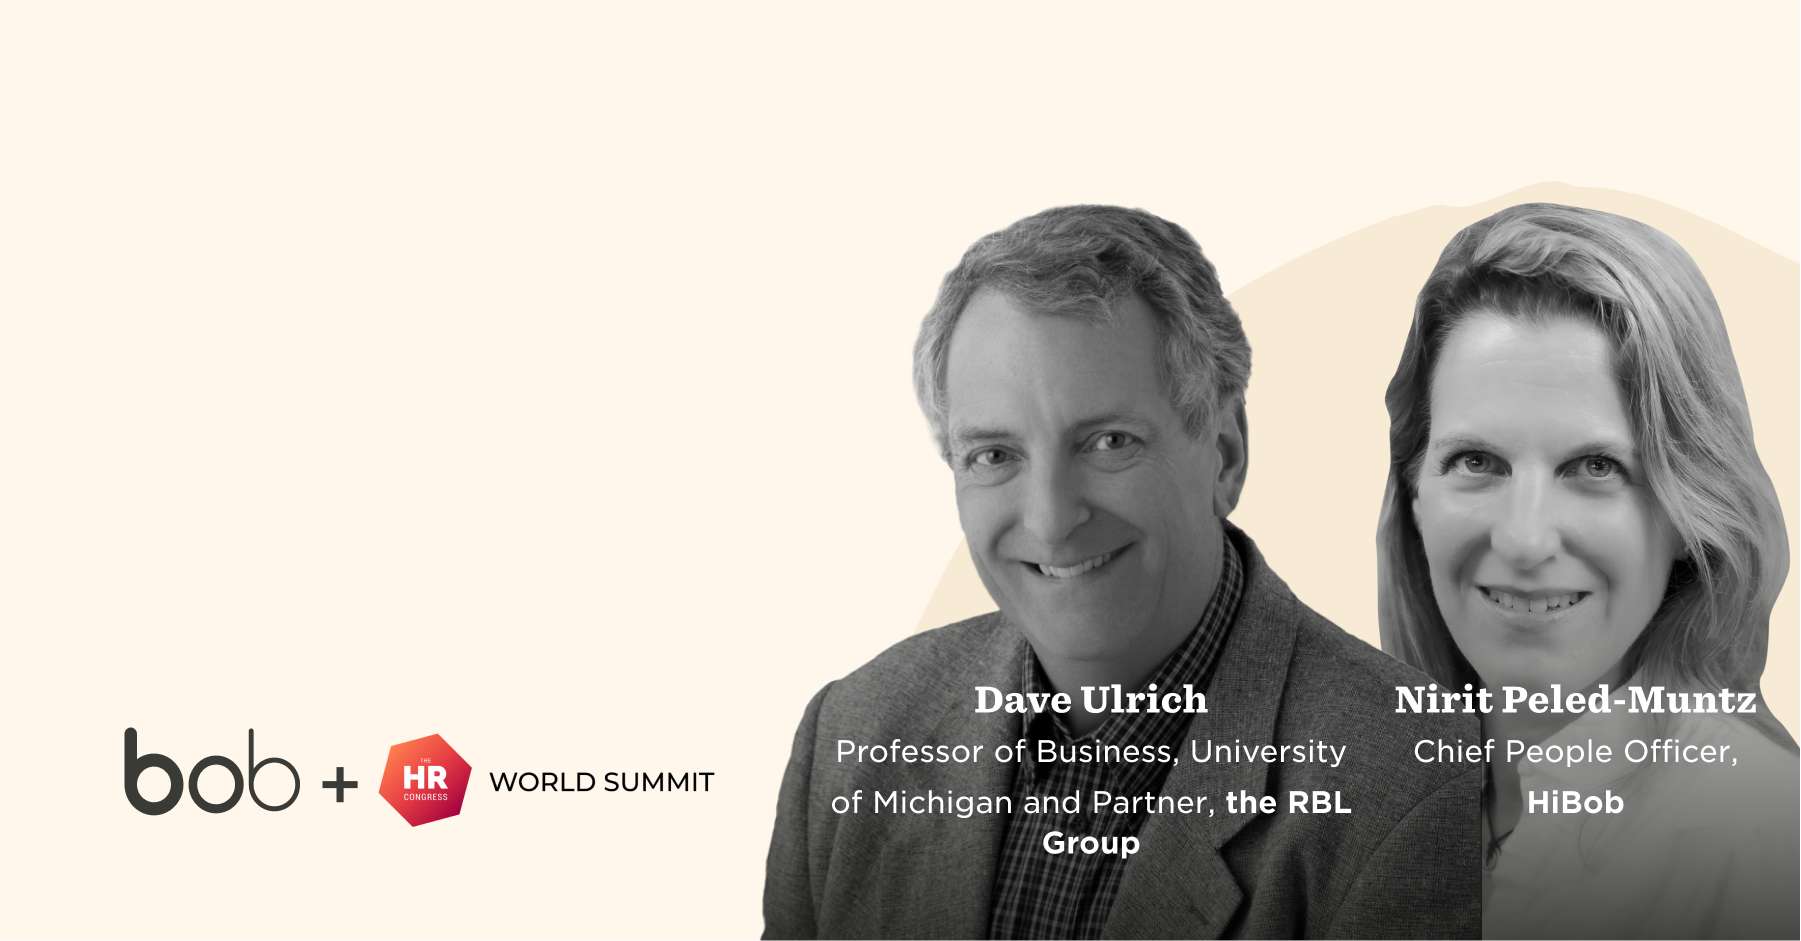 Get Results from Your HR Transformation - HR-World-Summit_Keynote-interview_Dave-Ulrich-Nirit_Webinar_featured-image.png